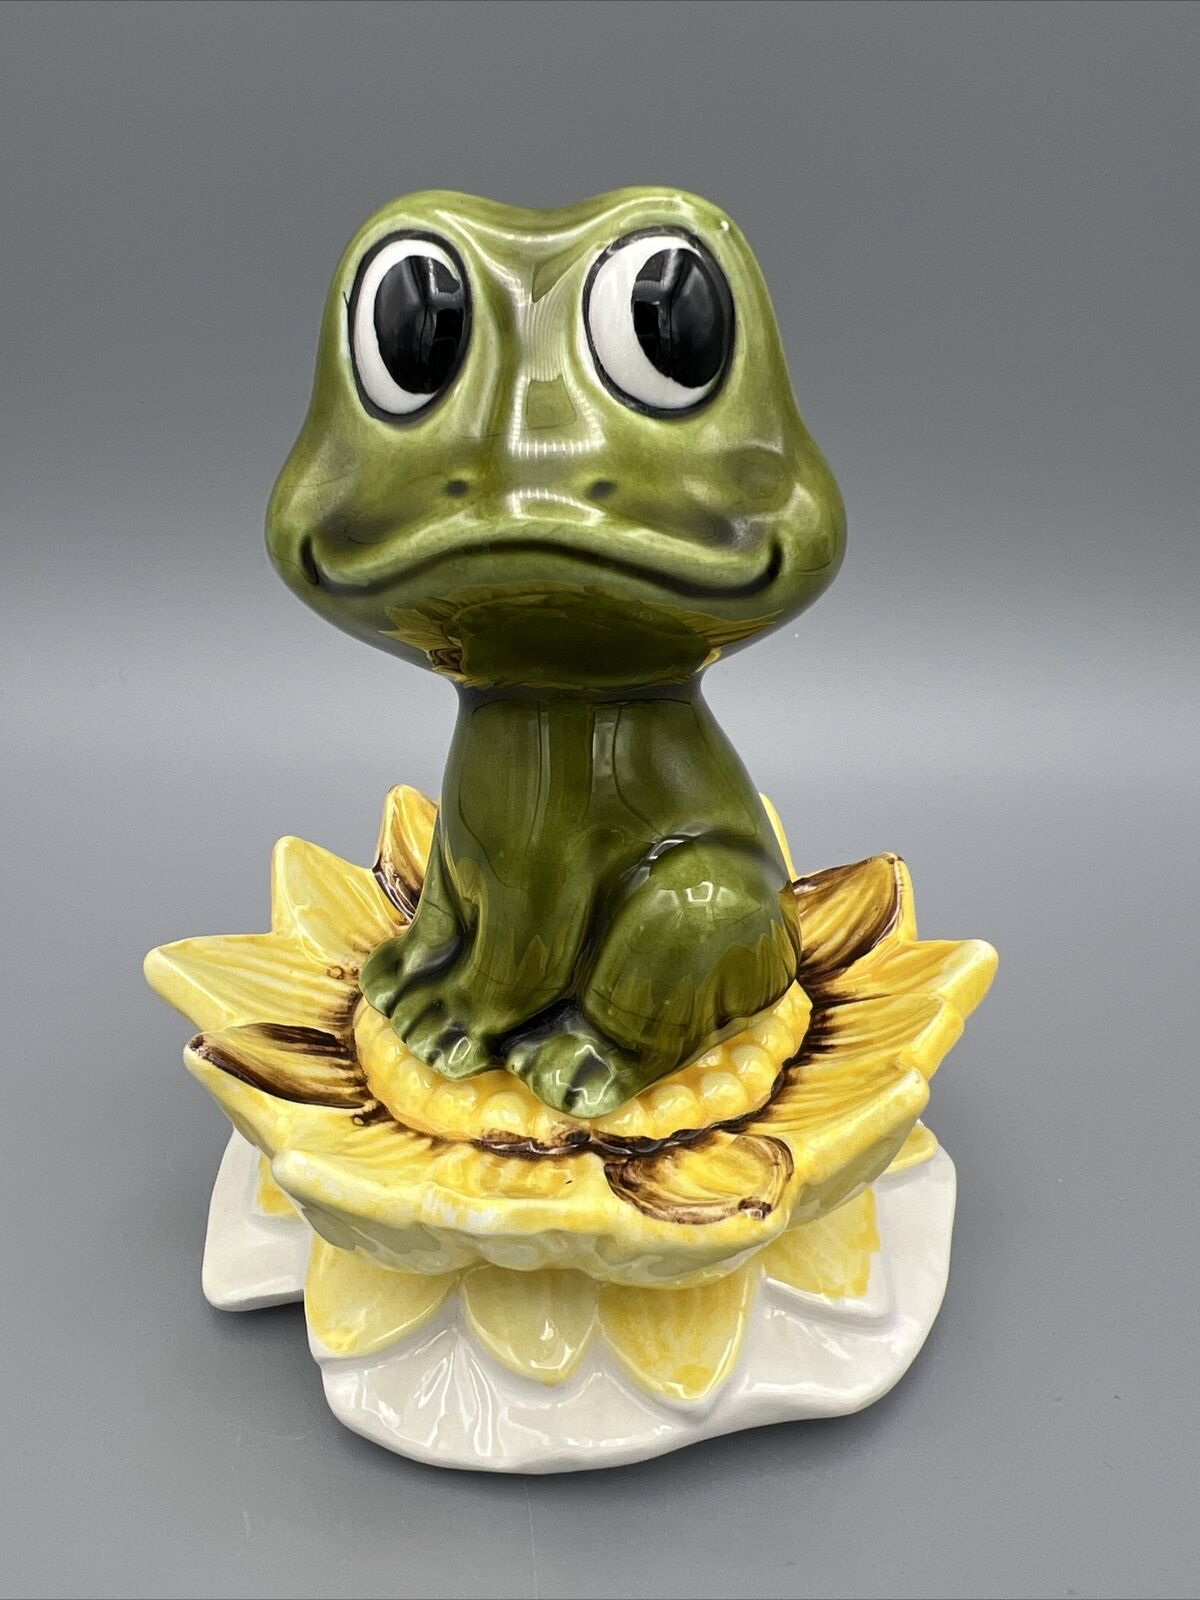 Neil The Frog Sears Vintage Frog And Lily Pad Salt And Pepper Shakers 1978